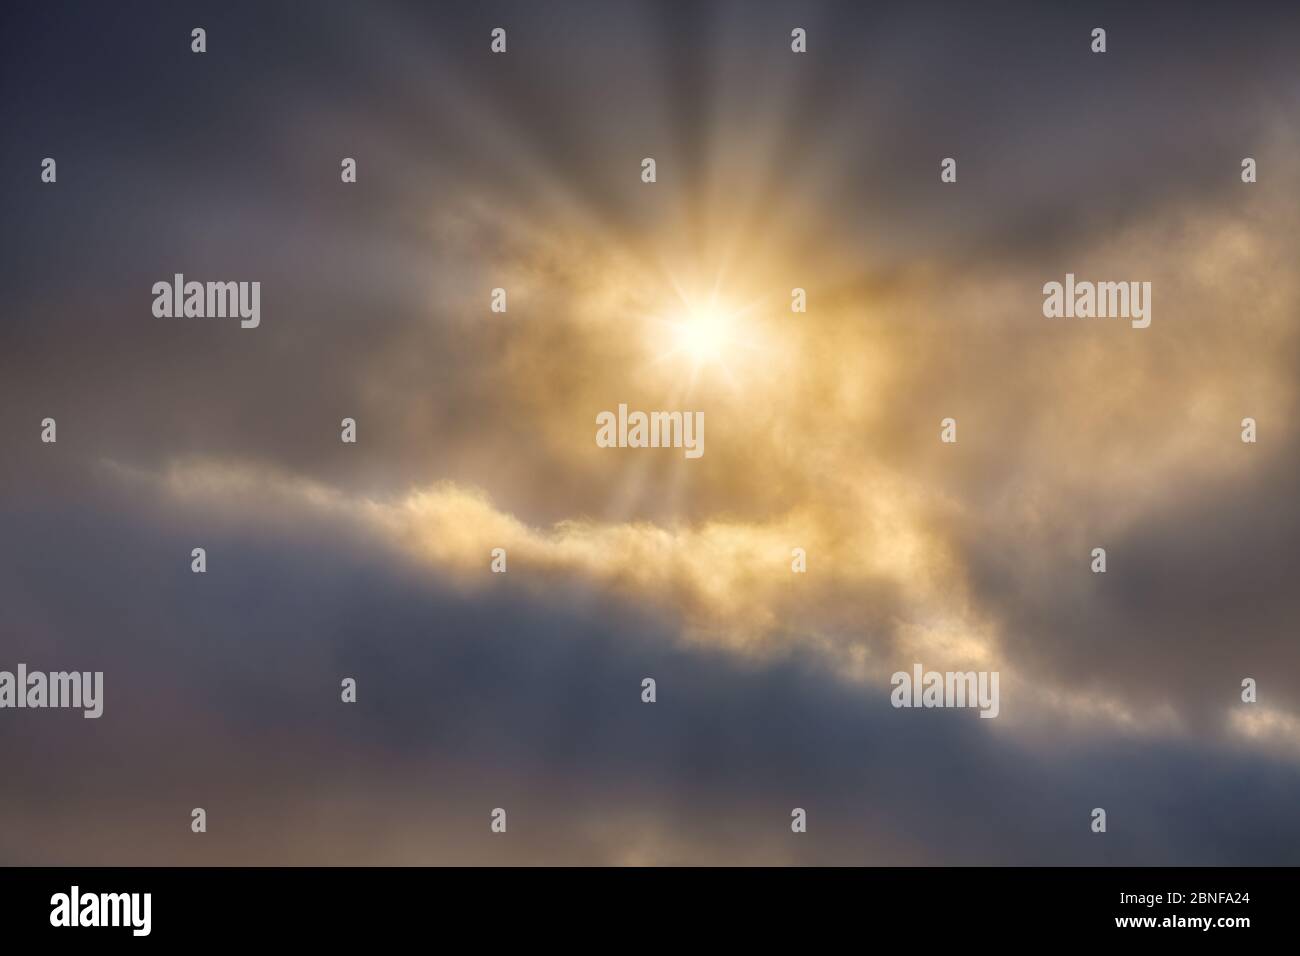 A Sunburst of Light Breaks Through the Glowing Bright Detailed Clouds Stock Photo